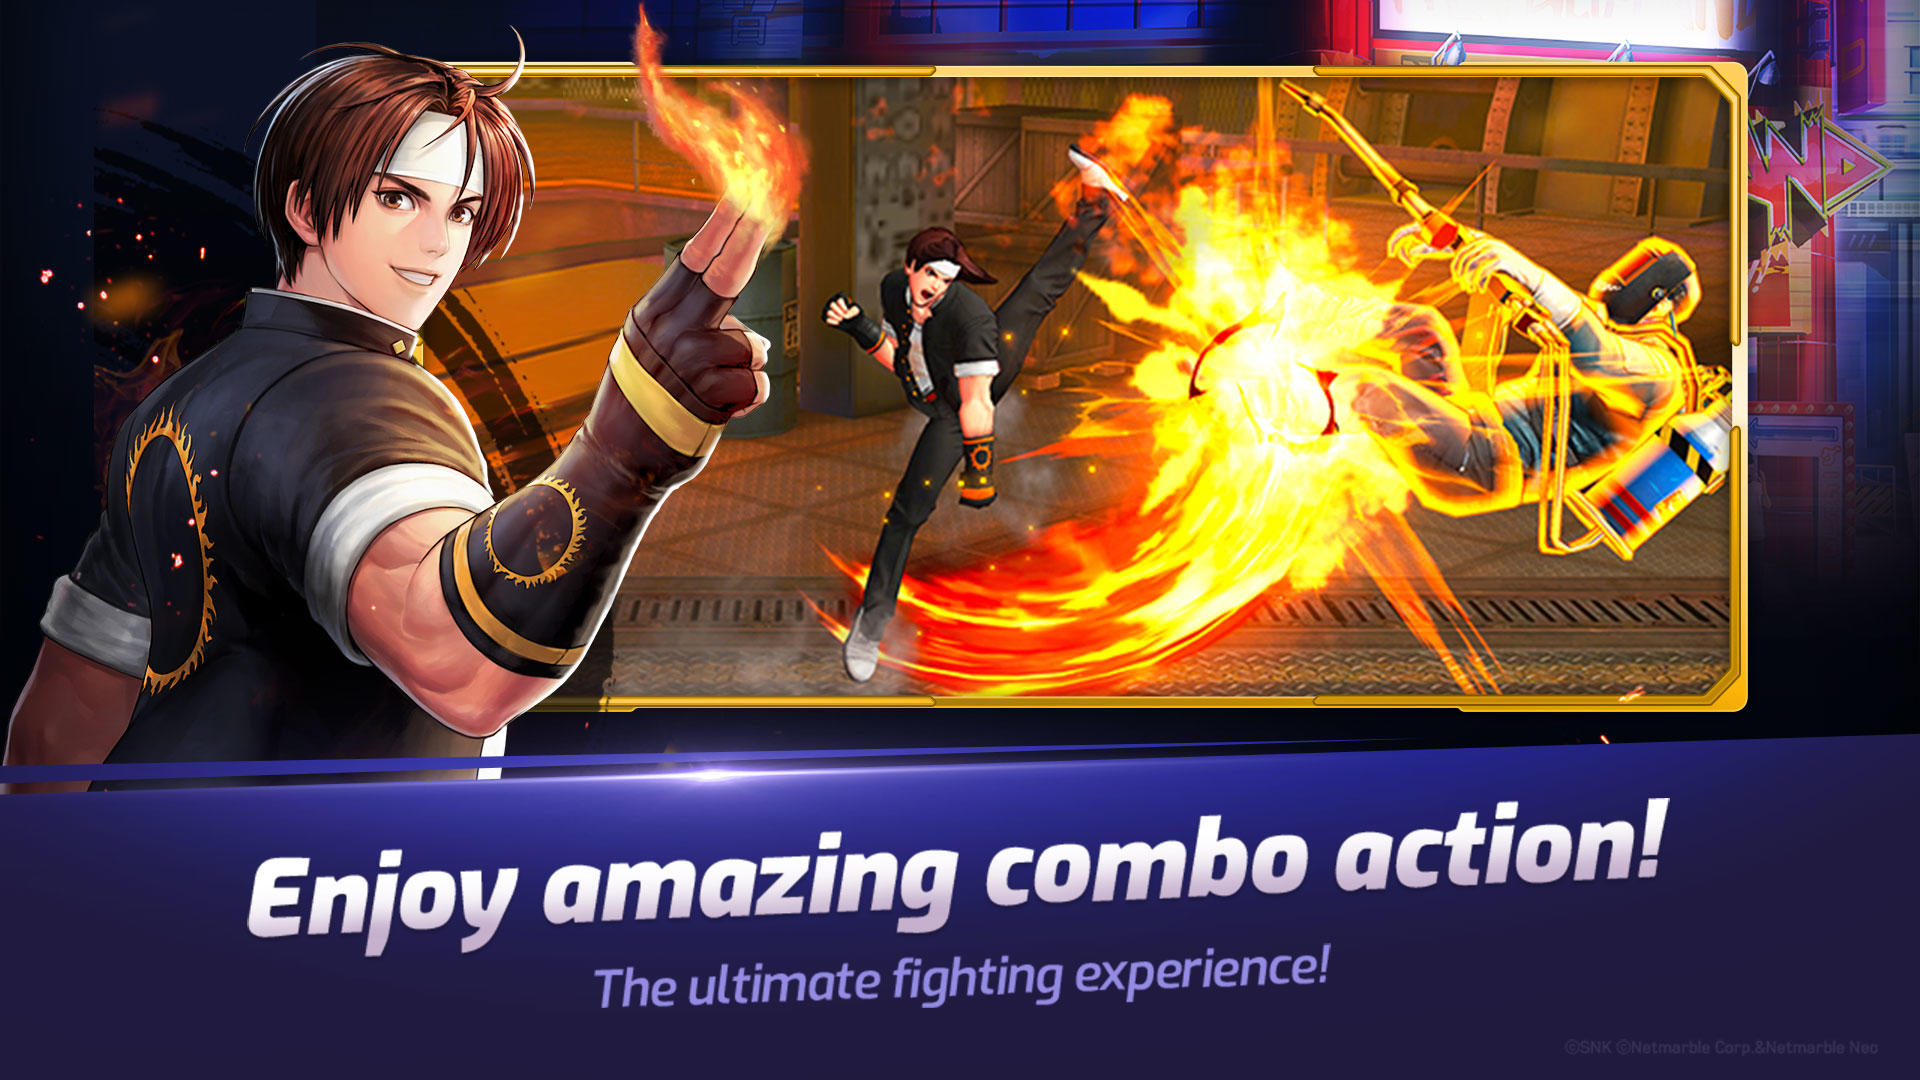 The King Of Fighters Allstar APK v1.13.2 Free Download - APK4Fun